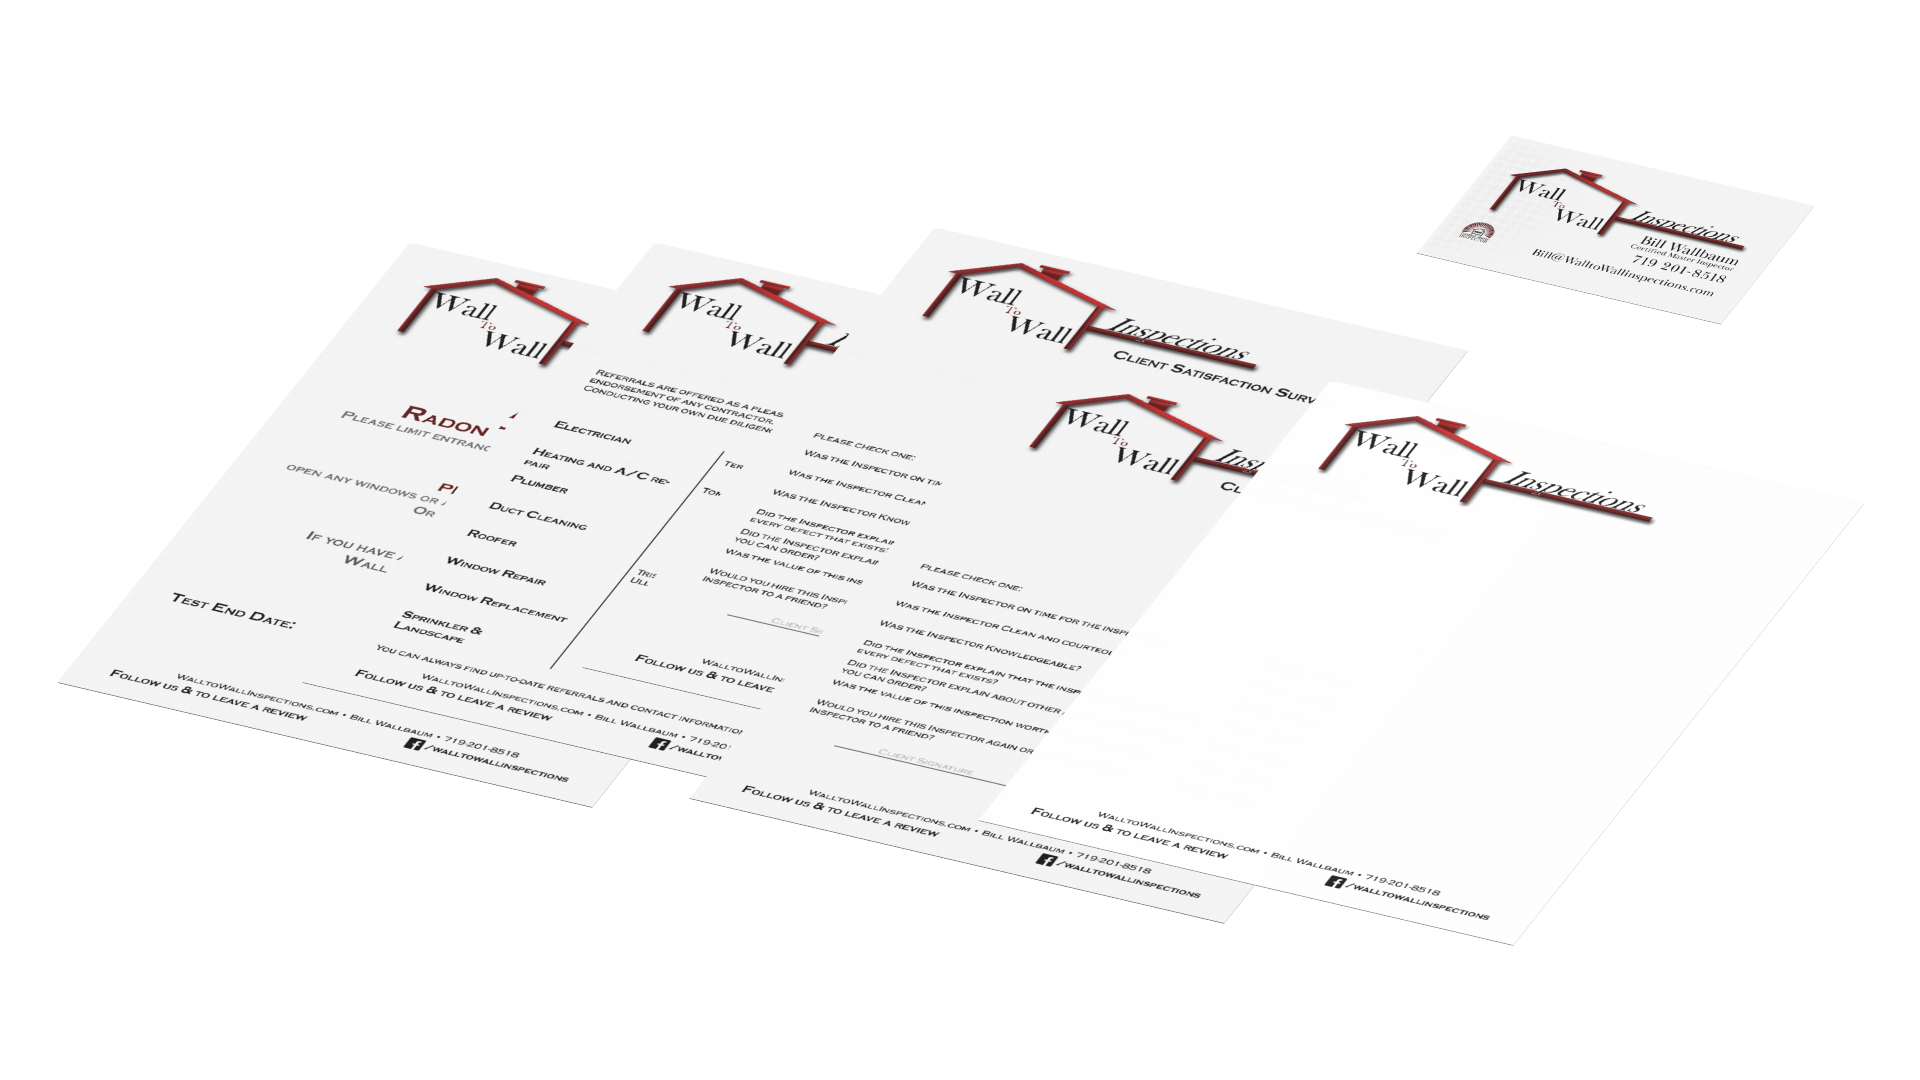 This image demonstrates the impact of a unified brand identity by showcasing how the Wall to Wall Inspections logo and design elements are consistently applied across various printed materials, including letterhead, business cards, and potentially other marketing collateral. This ensures a cohesive brand image across all touchpoints.